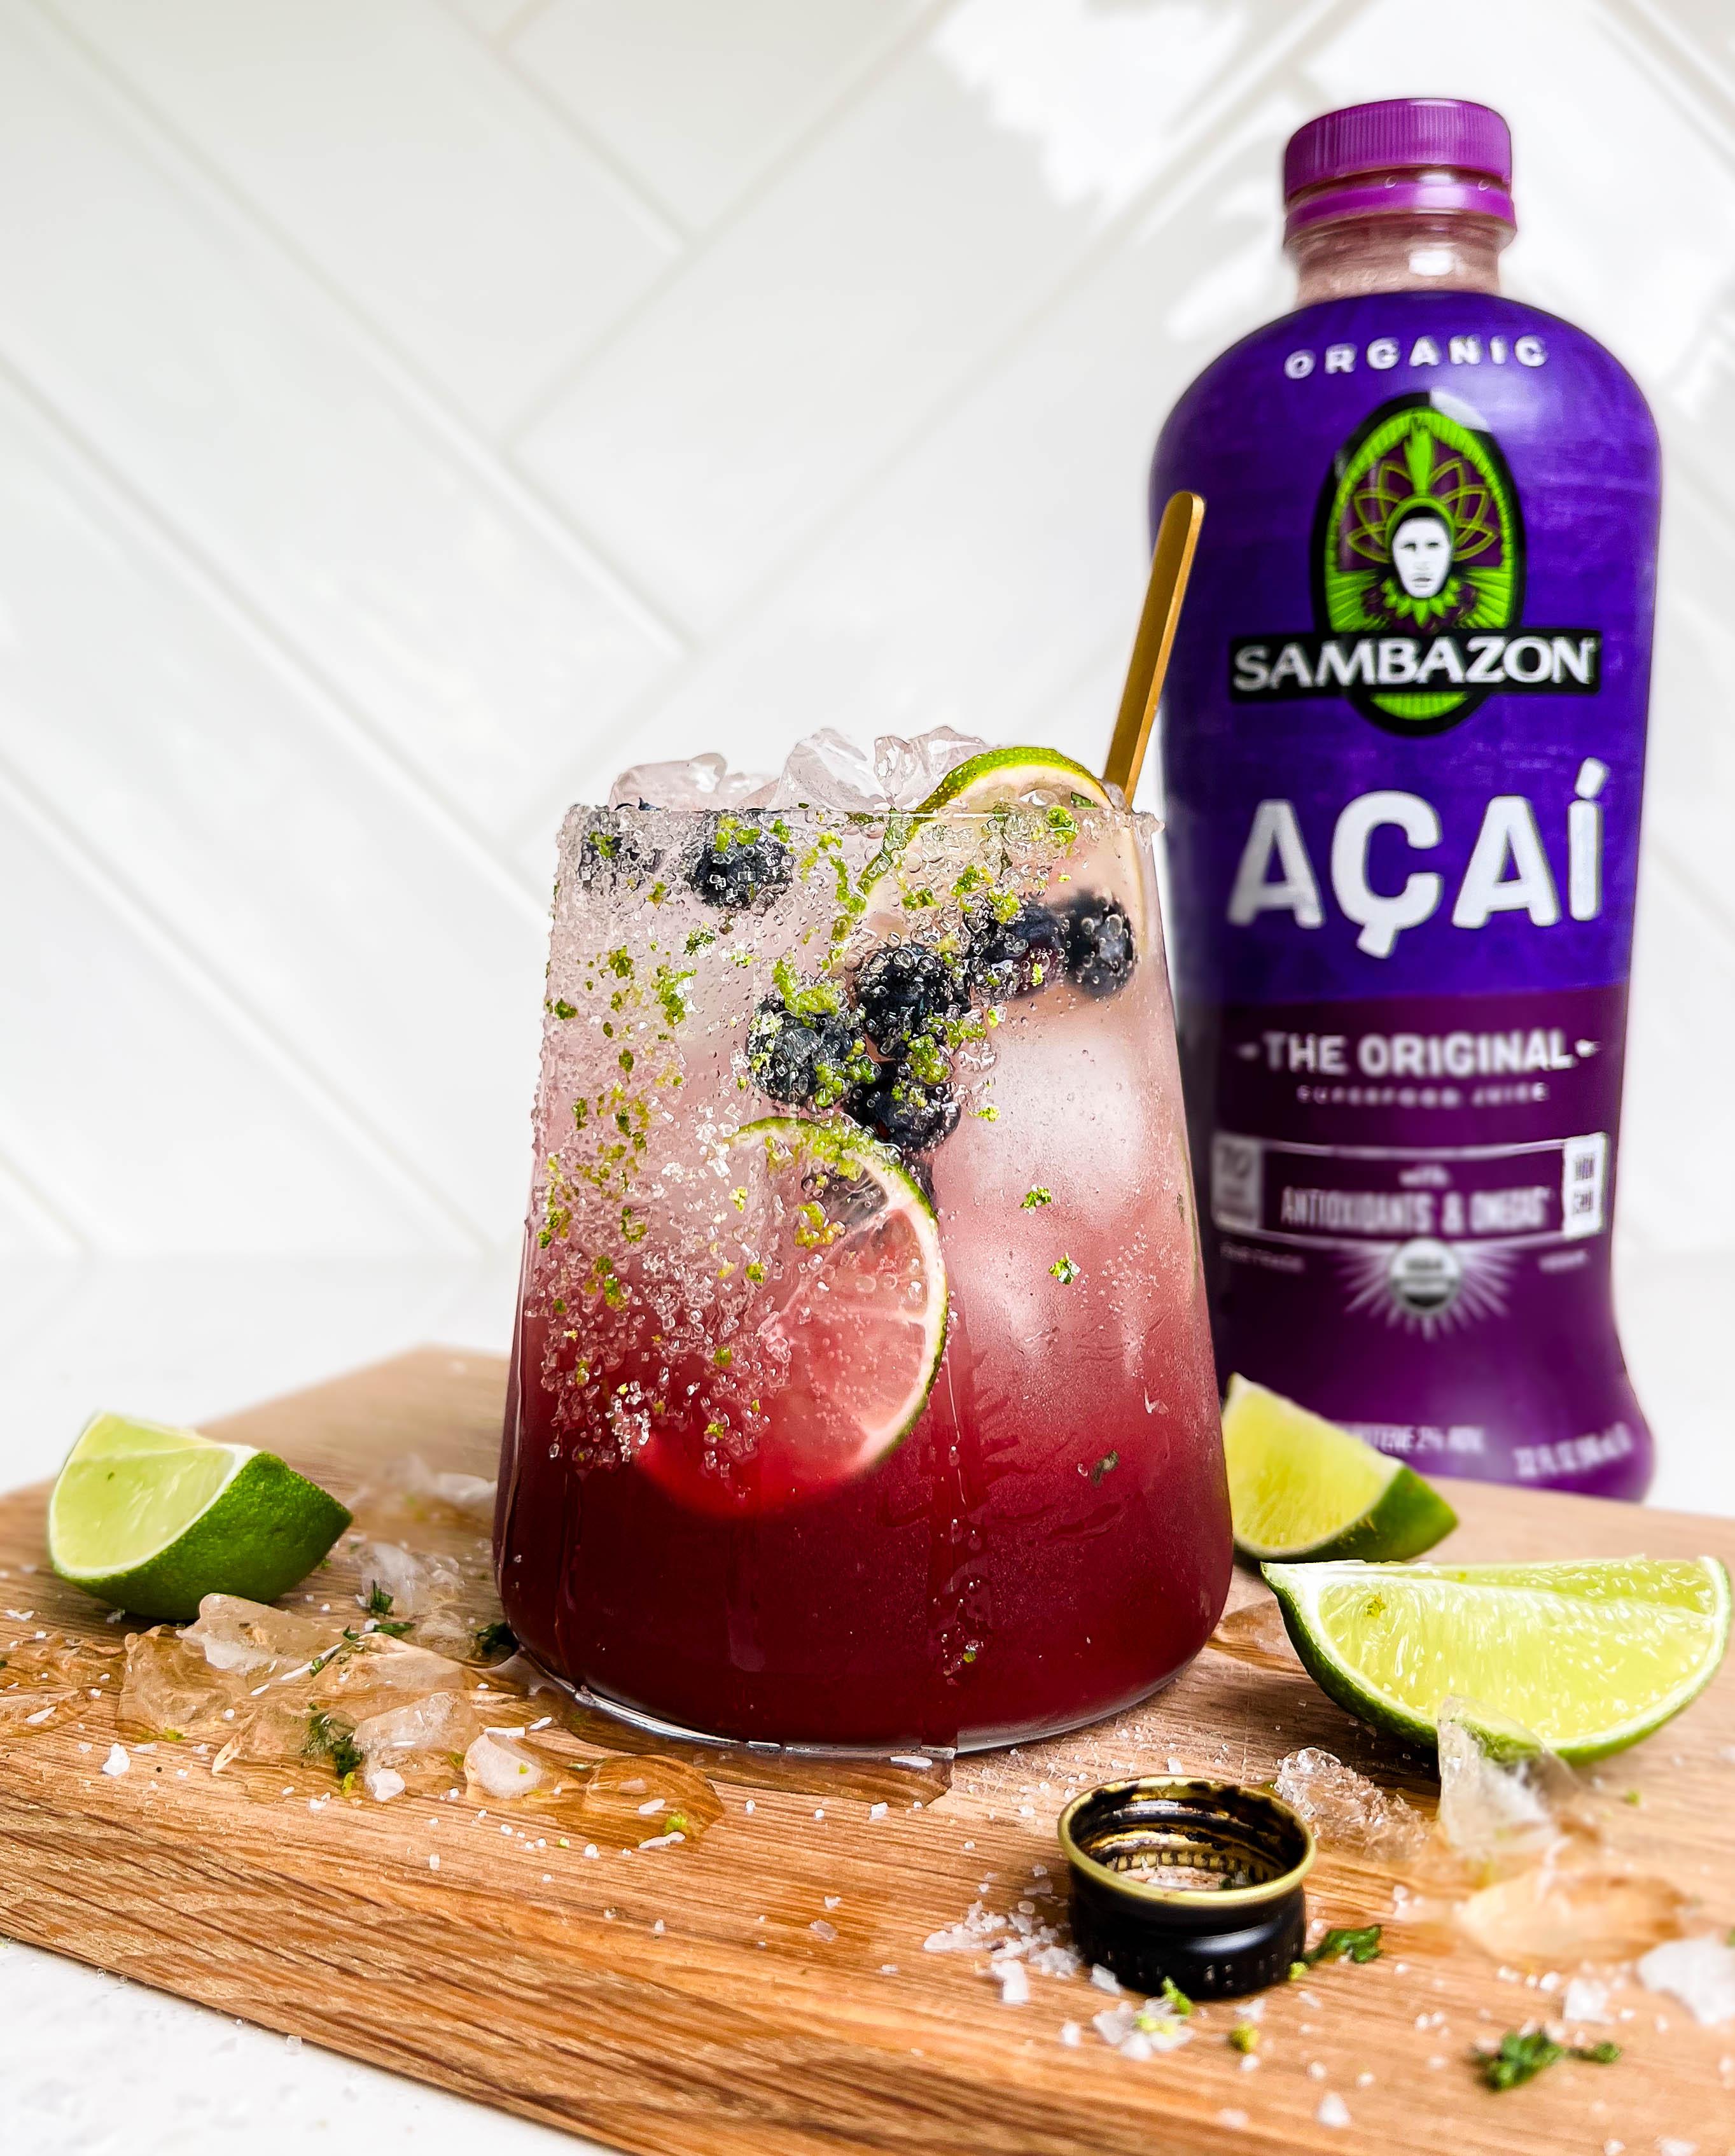 summer berry smash mocktail on cutting board with lime wedges next to a bottle of SAMBAZON acai juice